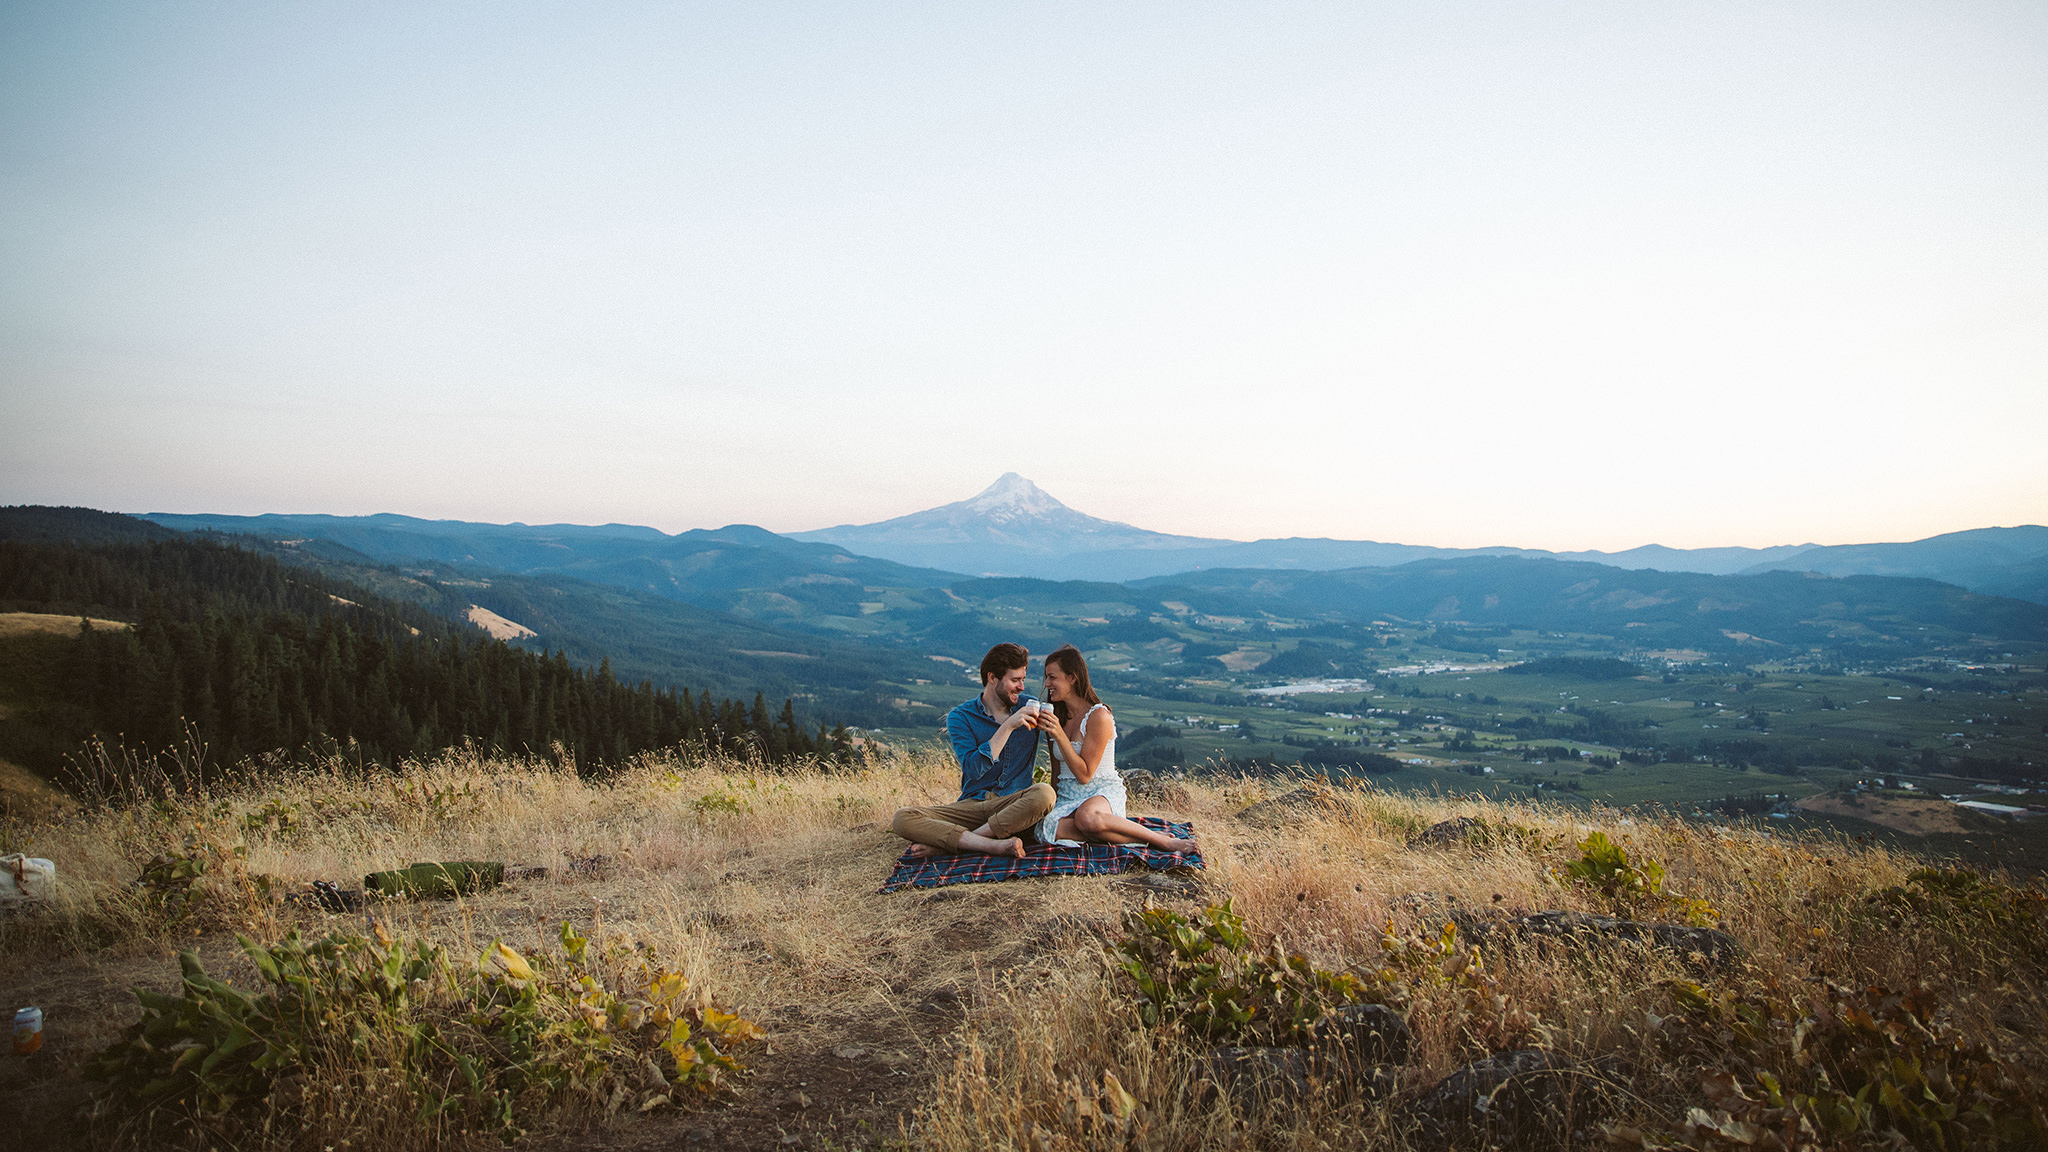 Cinematic engagement photo in Oregon with Mount Hood in the background